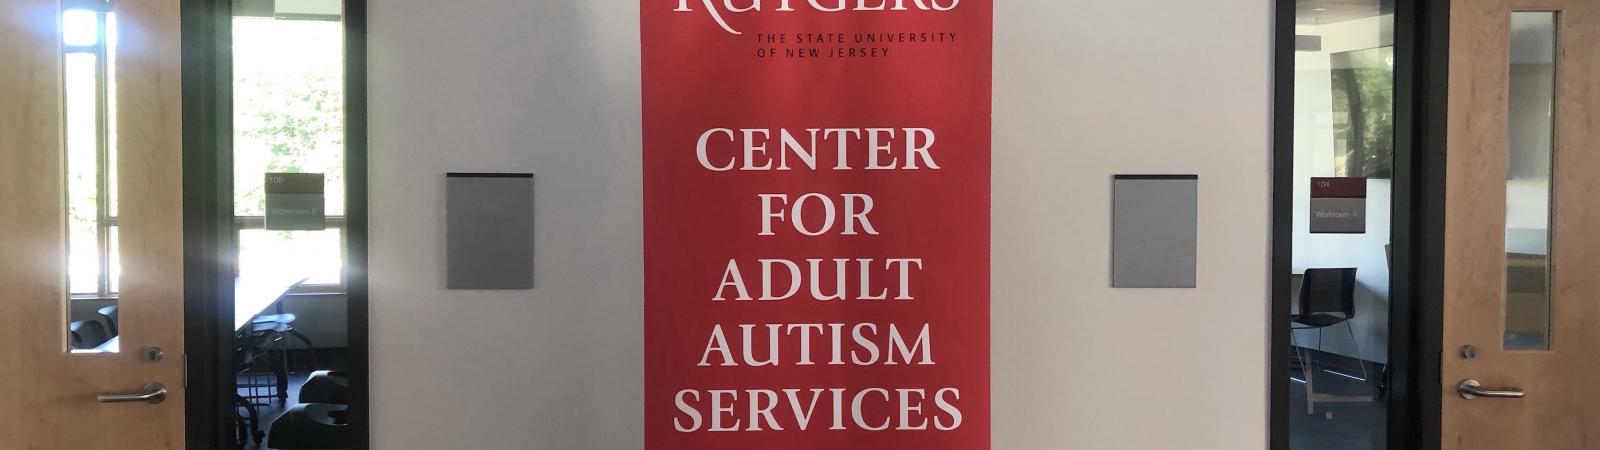 Rutgers Center for Adult Autism Center Banner